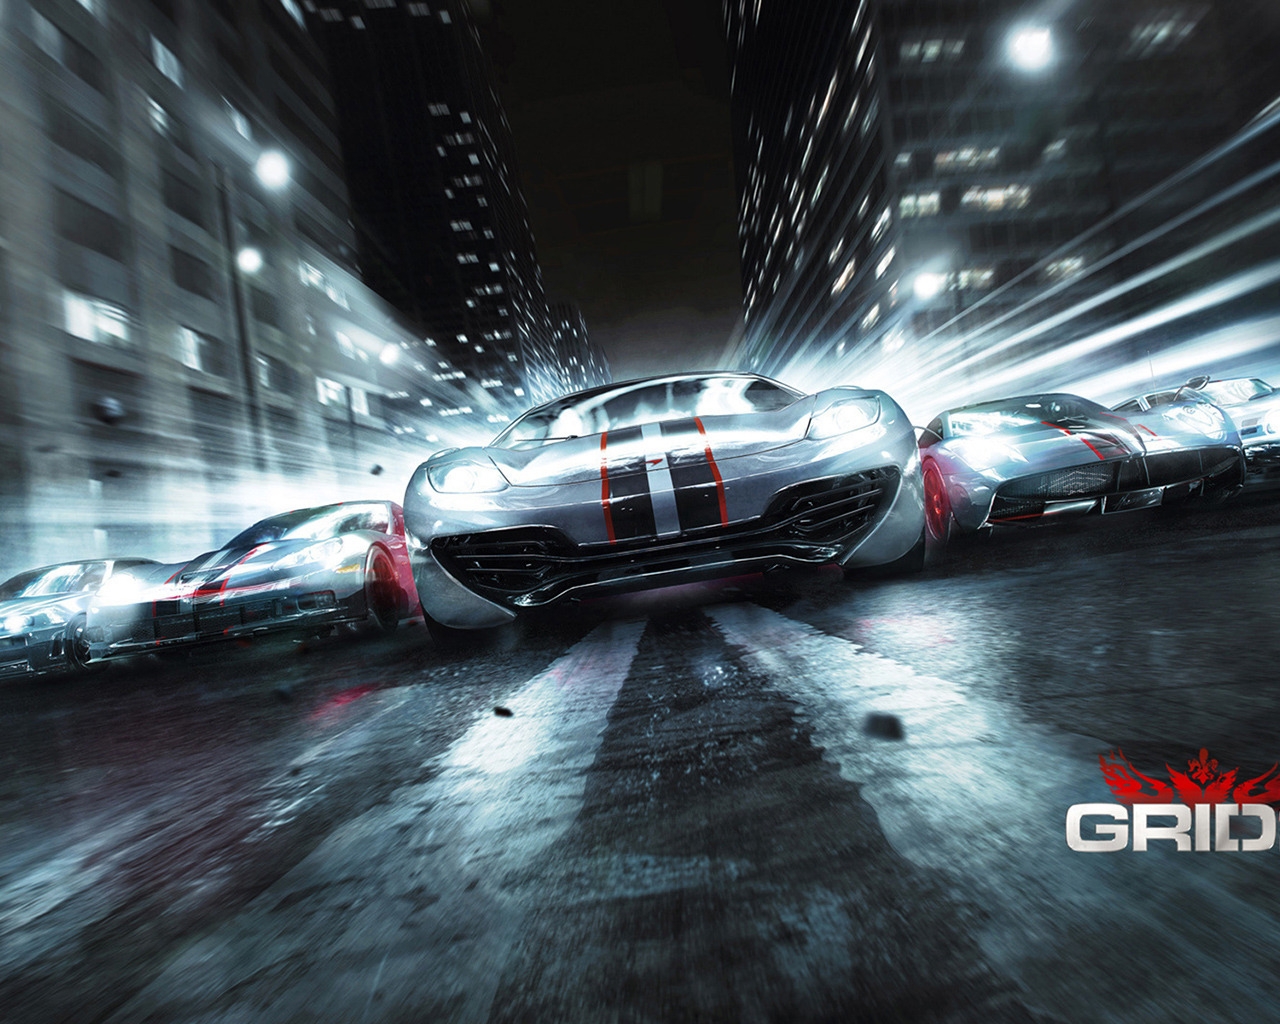 Grid 2 for 1280 x 1024 resolution